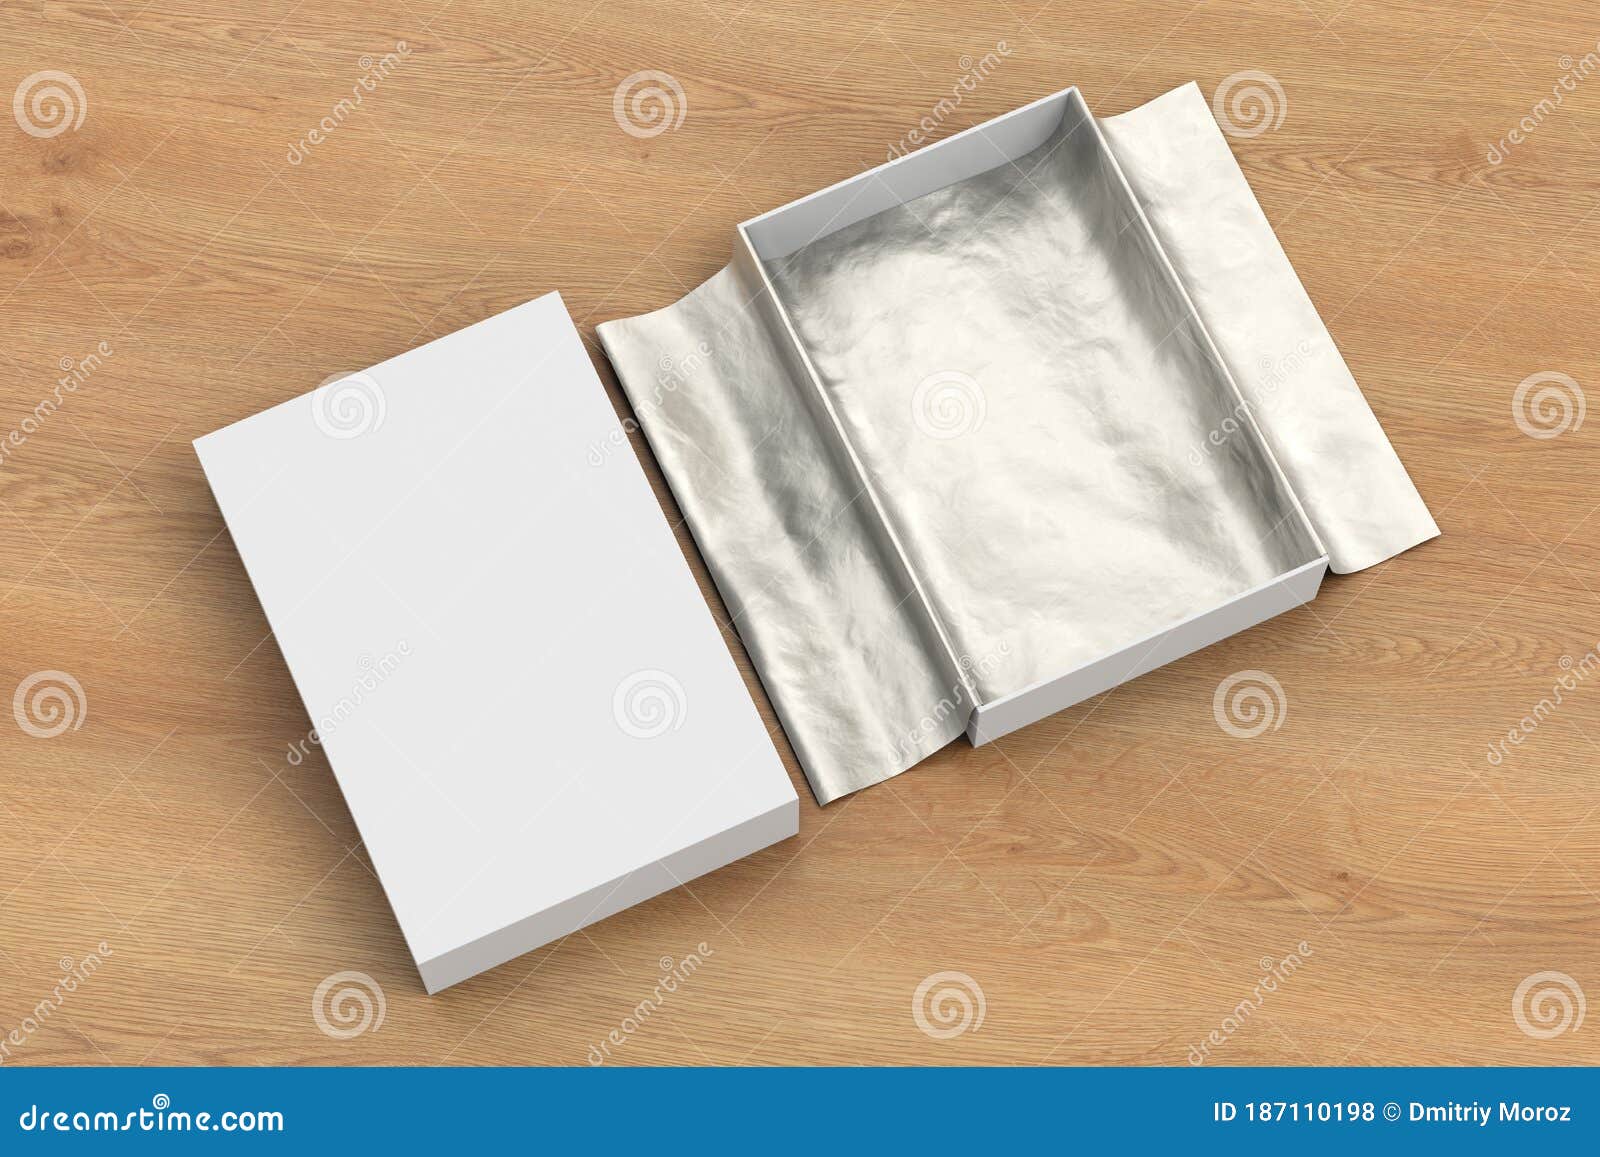 Gift Box Mockup With Unfolded Wrapping Paper Stock Illustration - Illustration of illustration ...